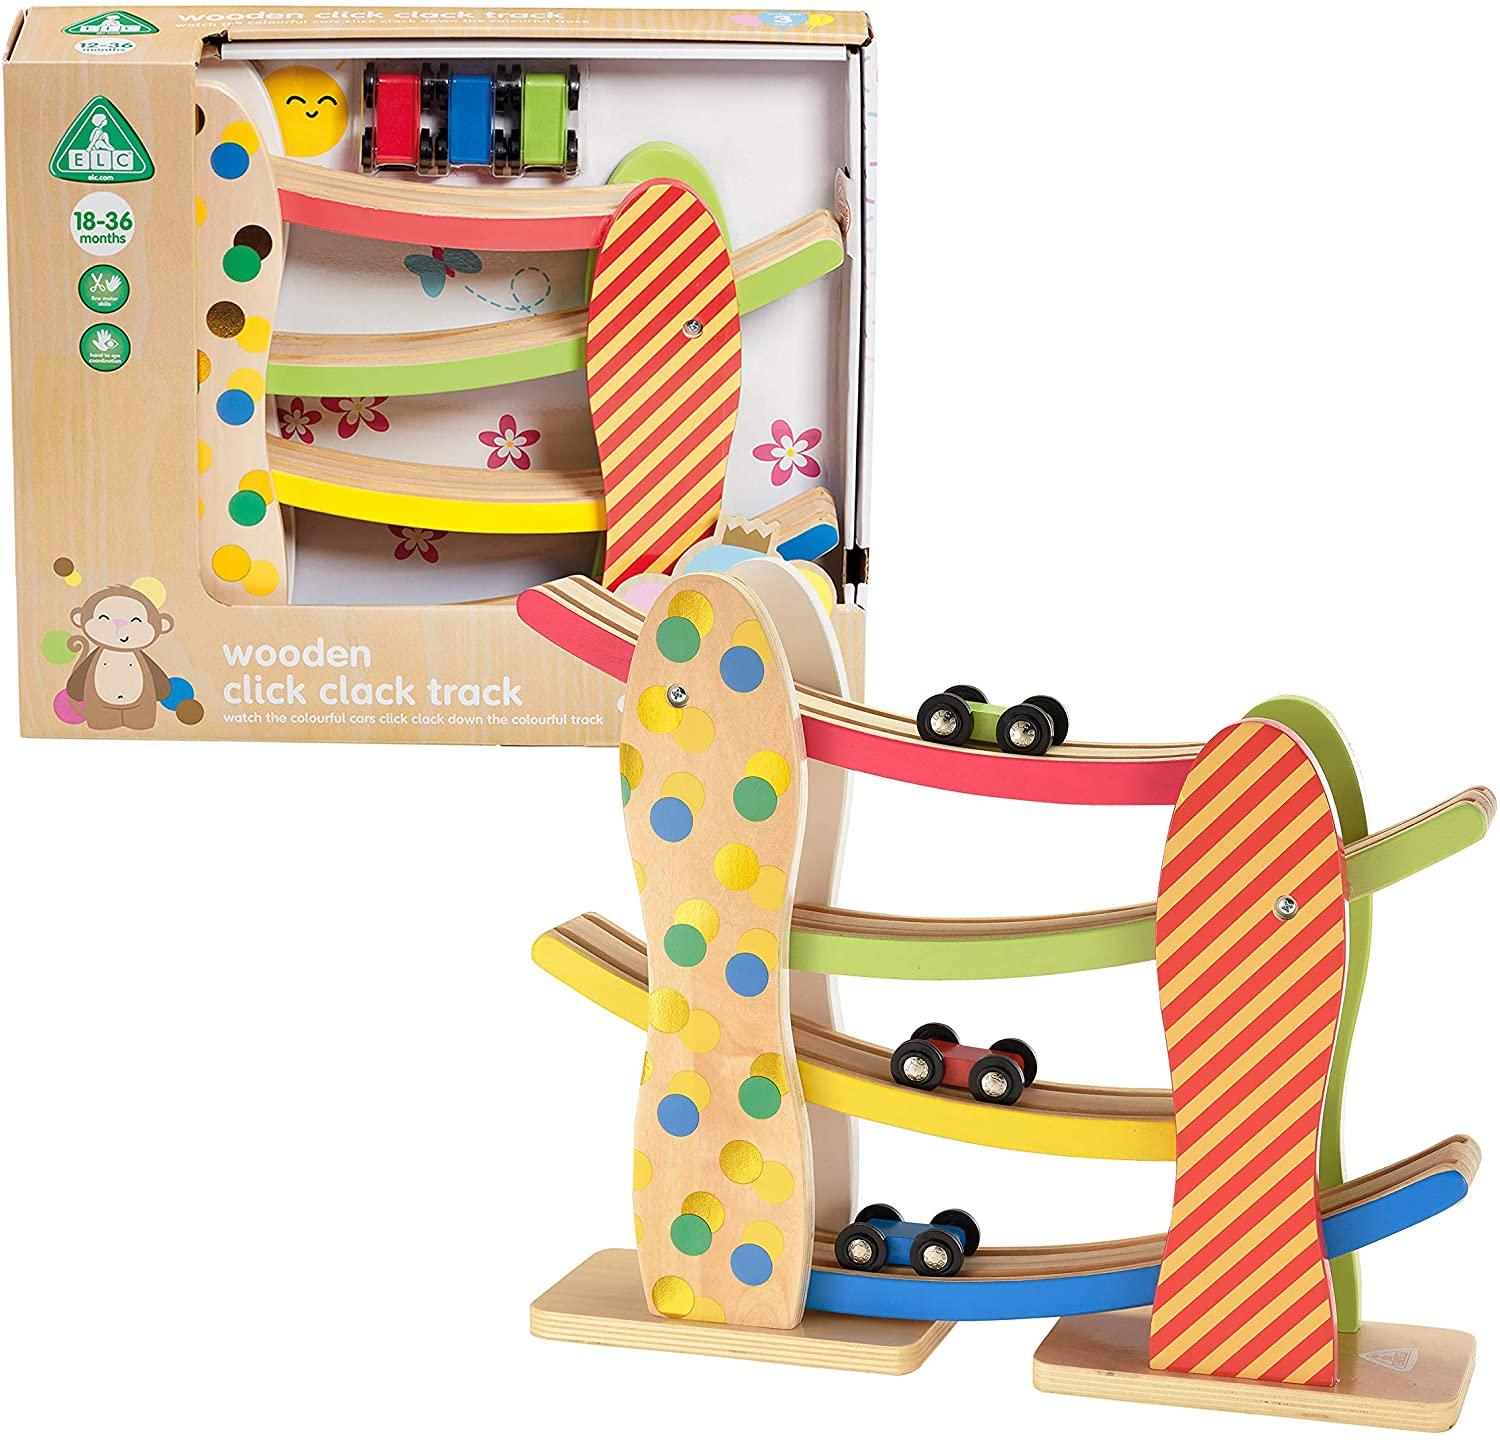 Early Learning Centre Wooden Click Clack Track for $7.10